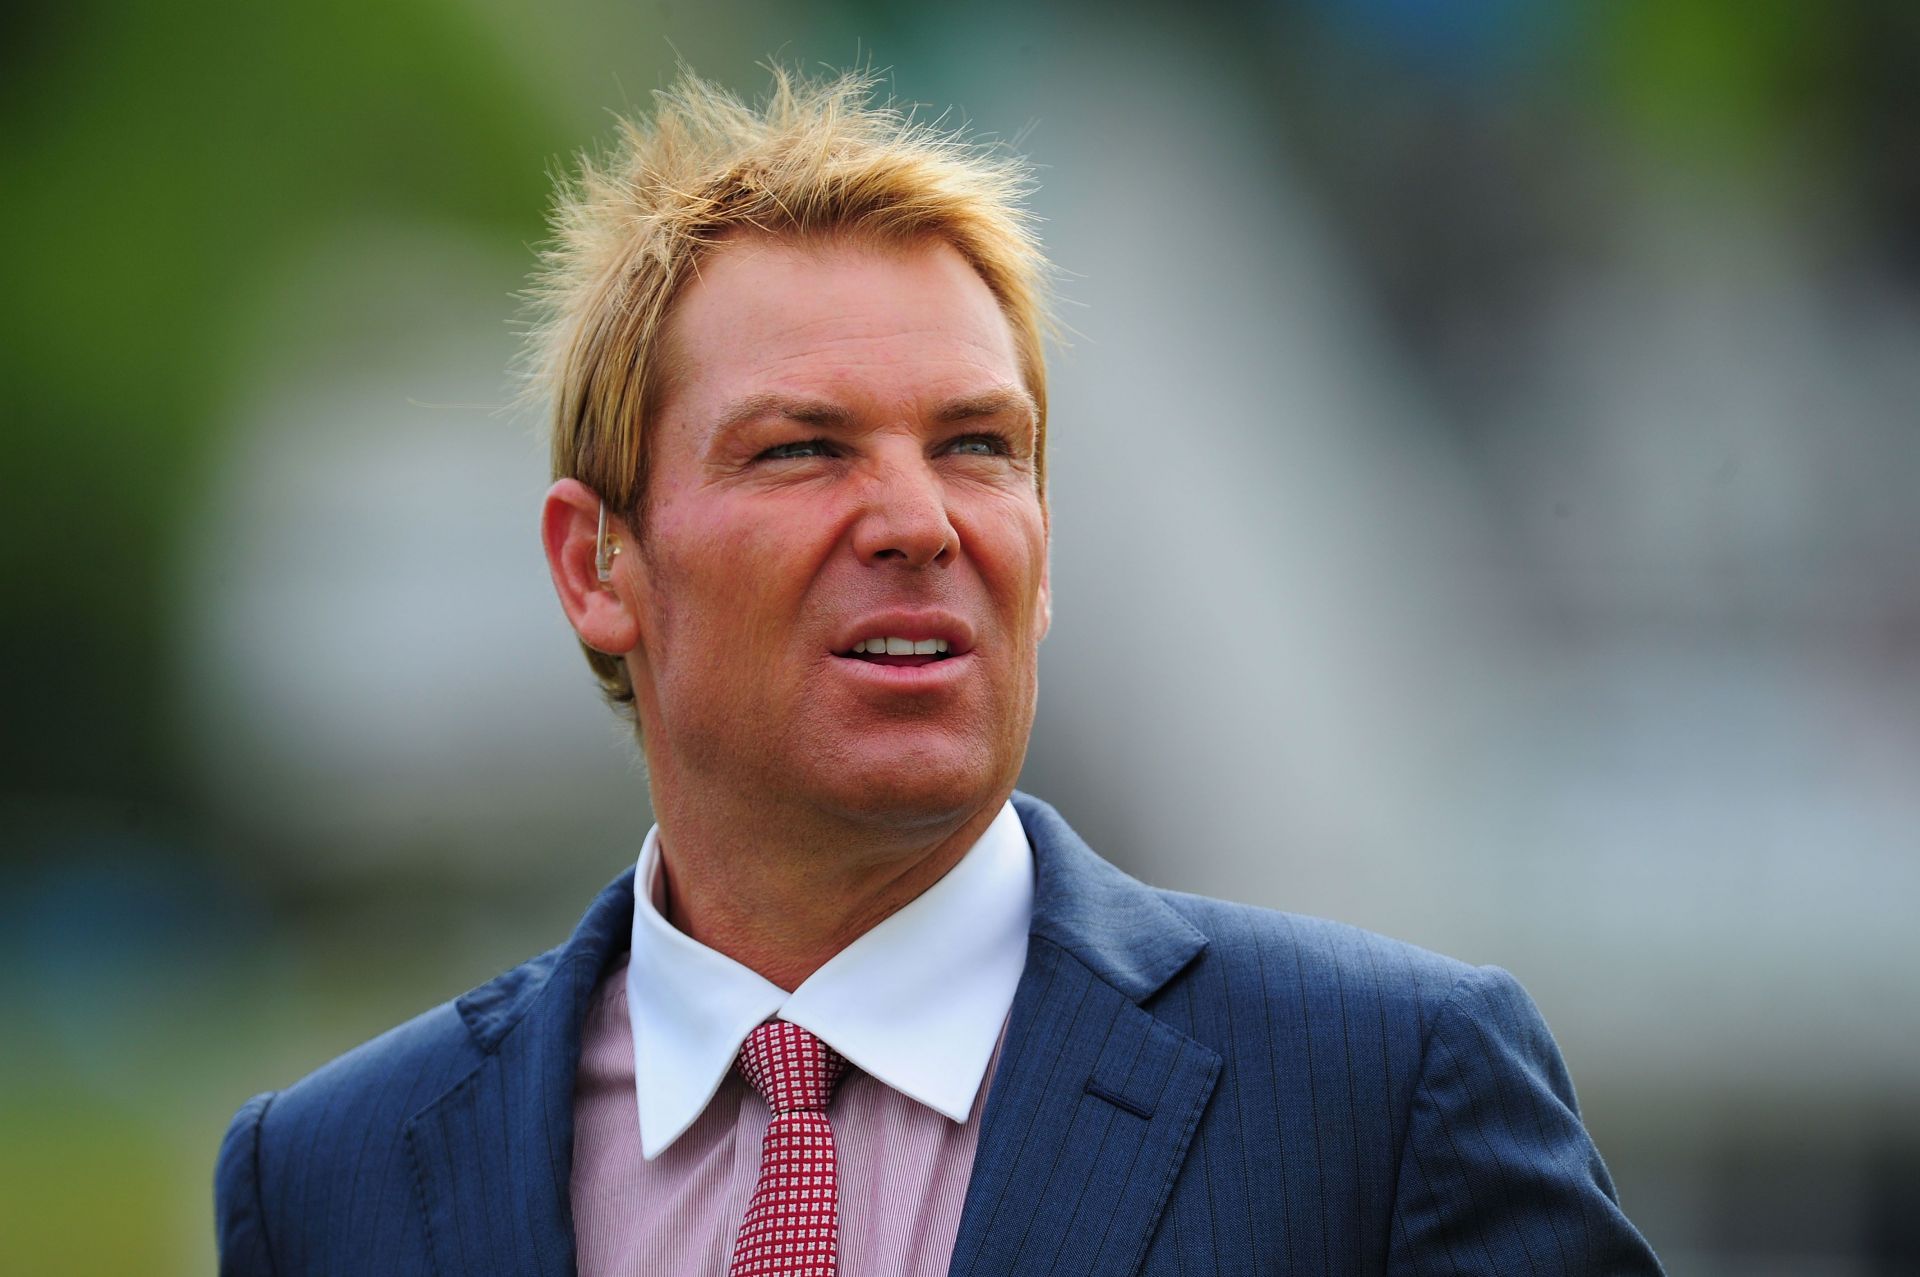 Warne was never too far away from controversy